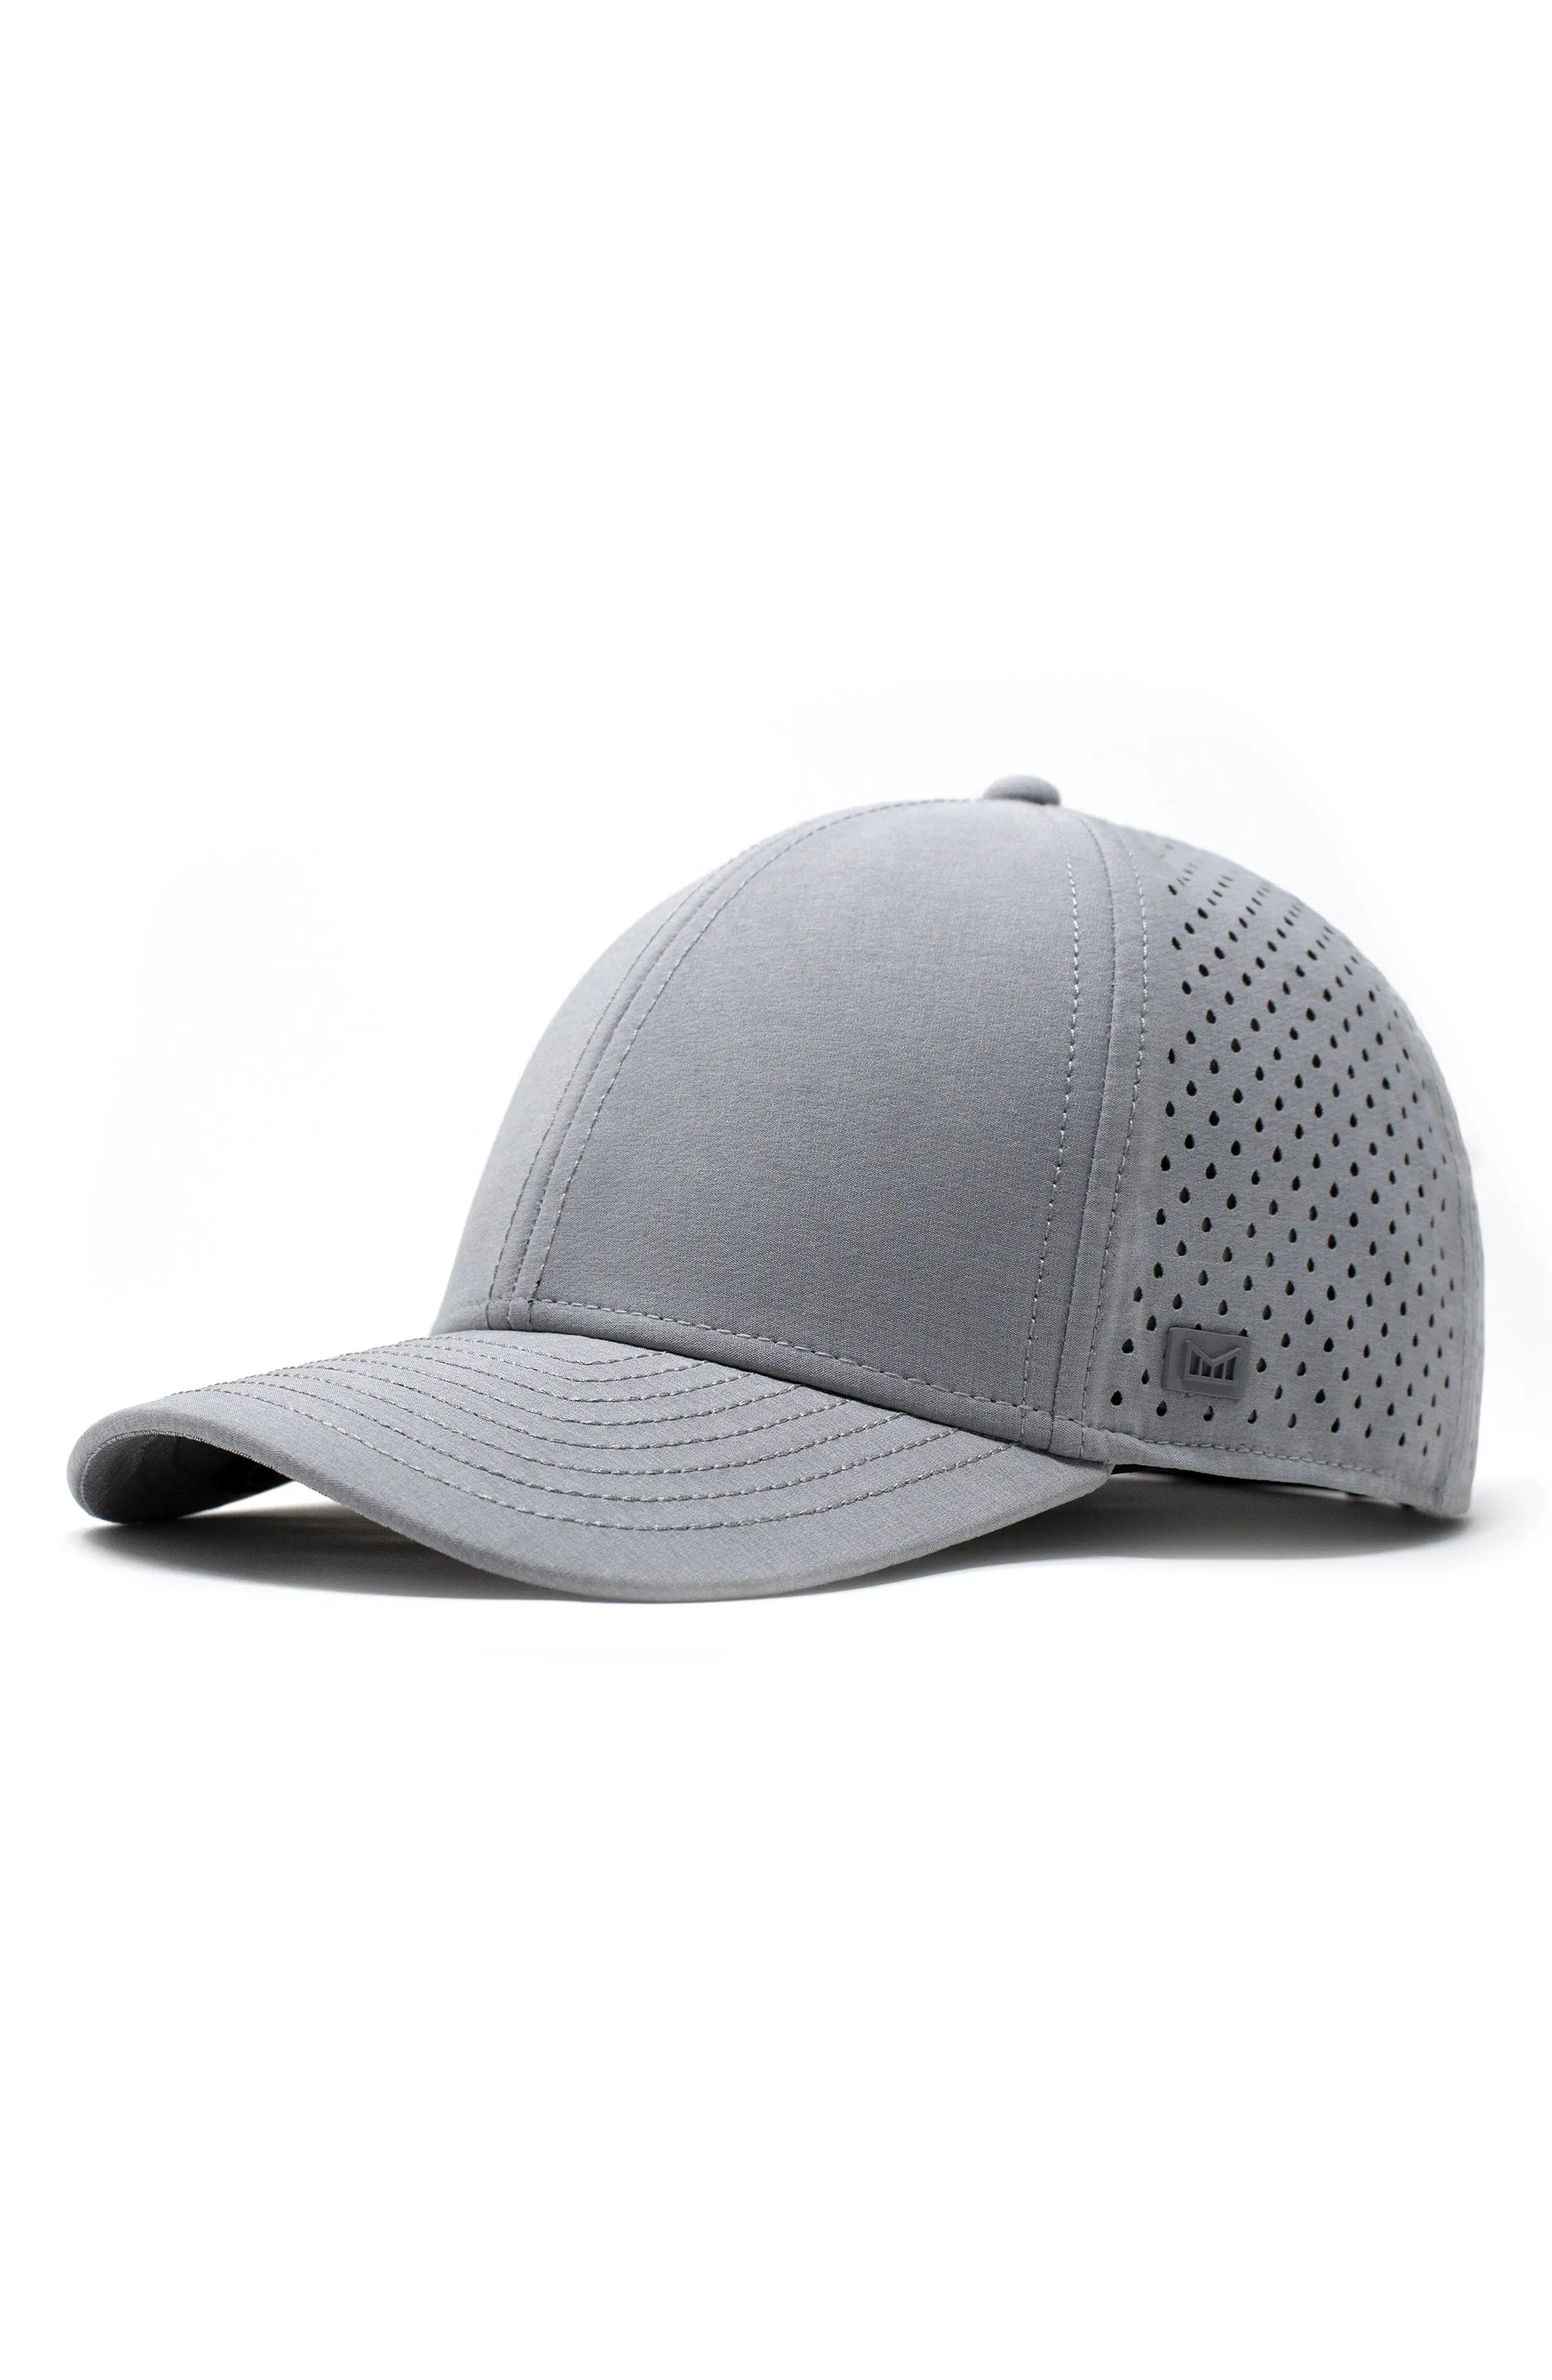 Melin Hydro A-Game Snapback Baseball Cap in Heather Grey at Nordstrom | Nordstrom